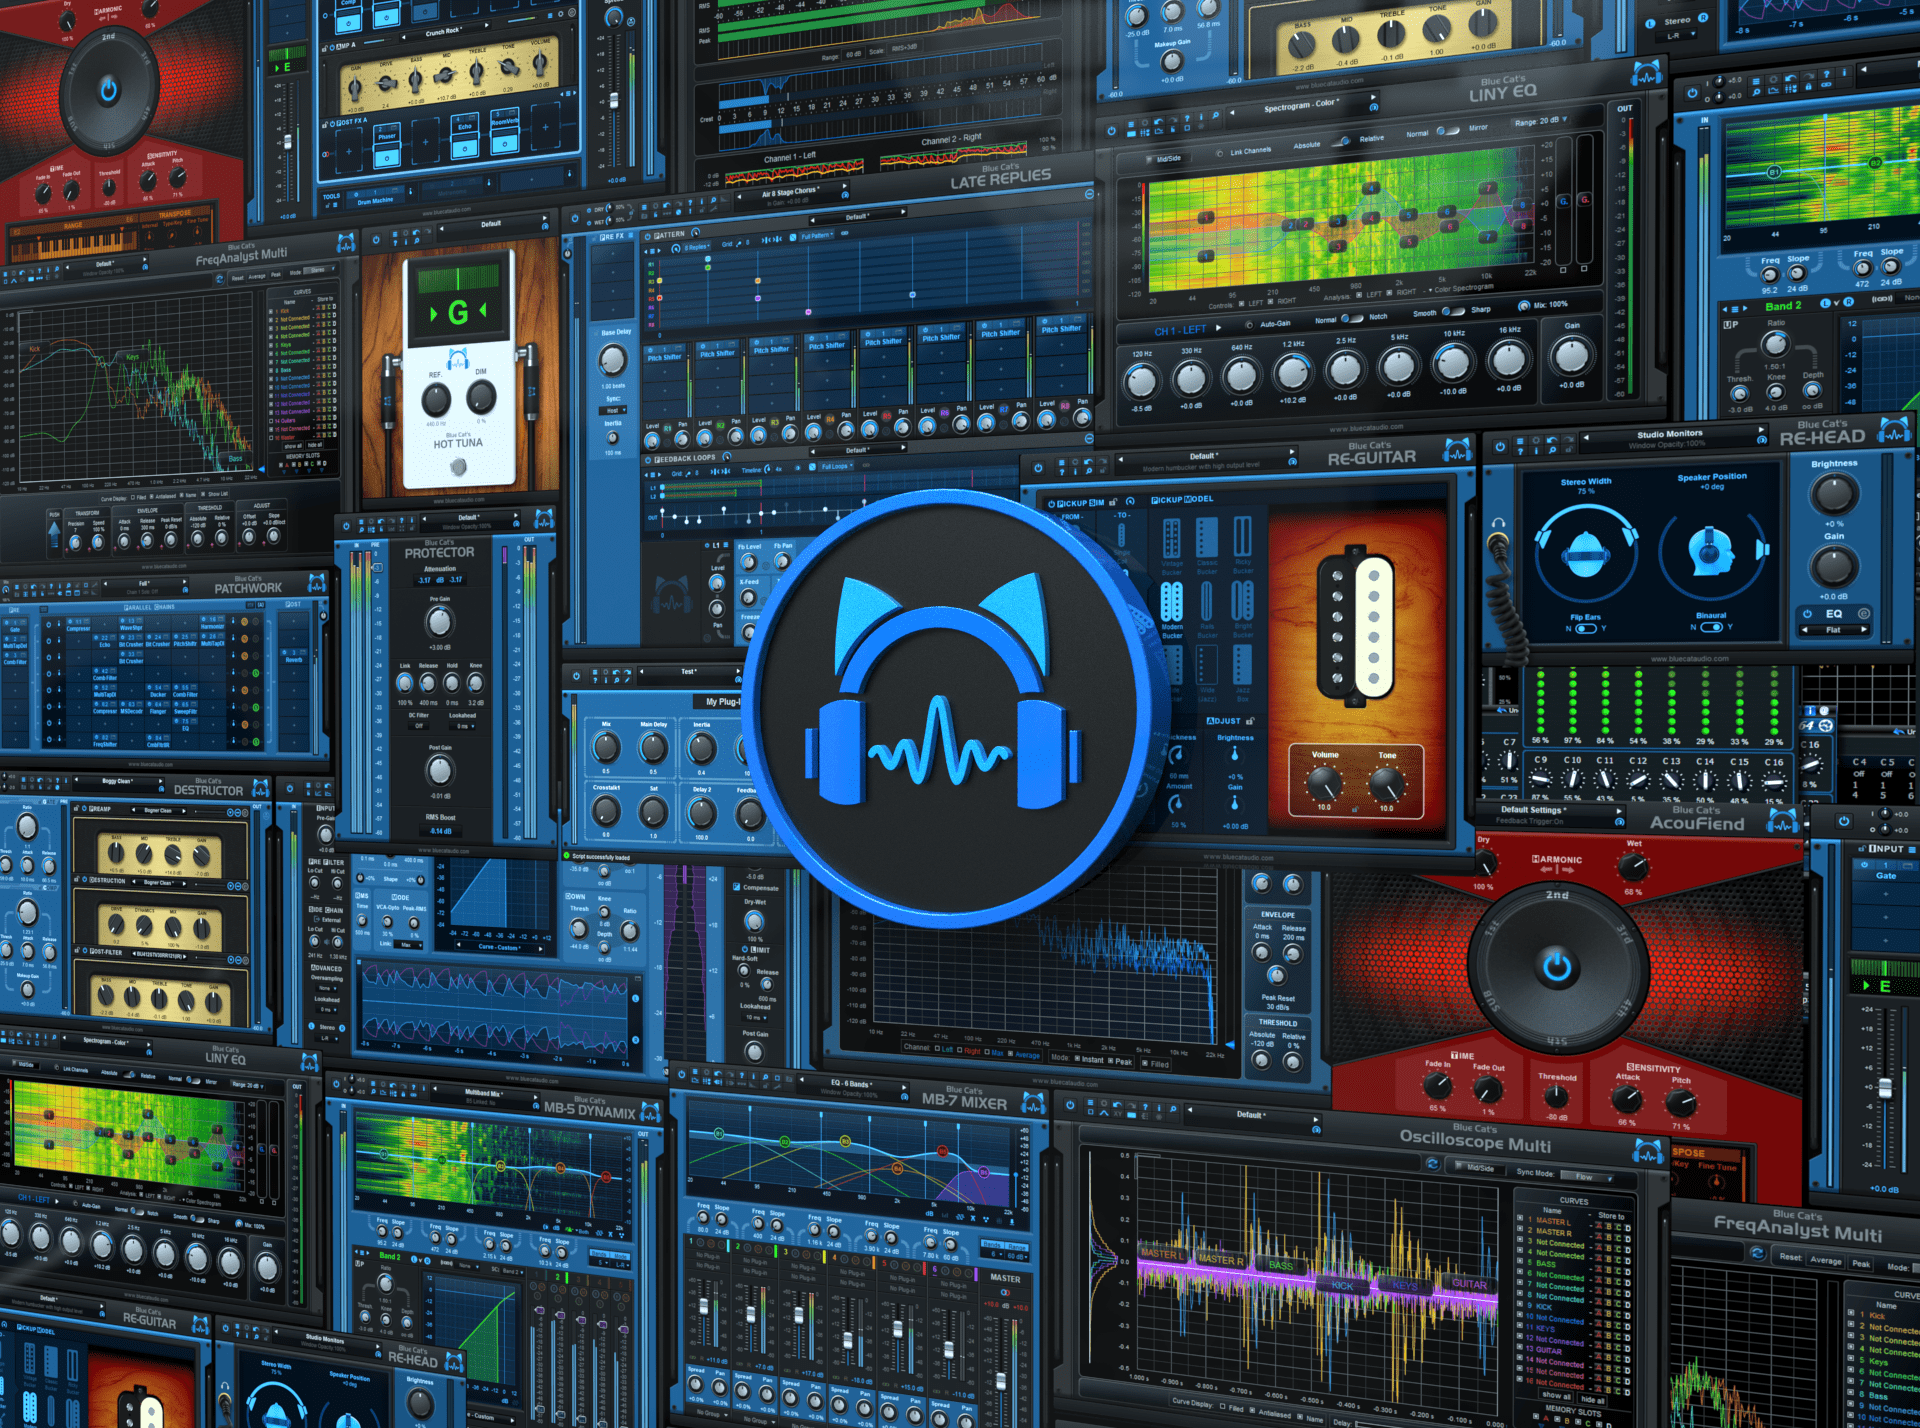 Blue Cat's All Plug-Ins Pack - All Our Professional Audio Plugins in a Single Bundle (AU, VST, VST3, RTAS, AAX)